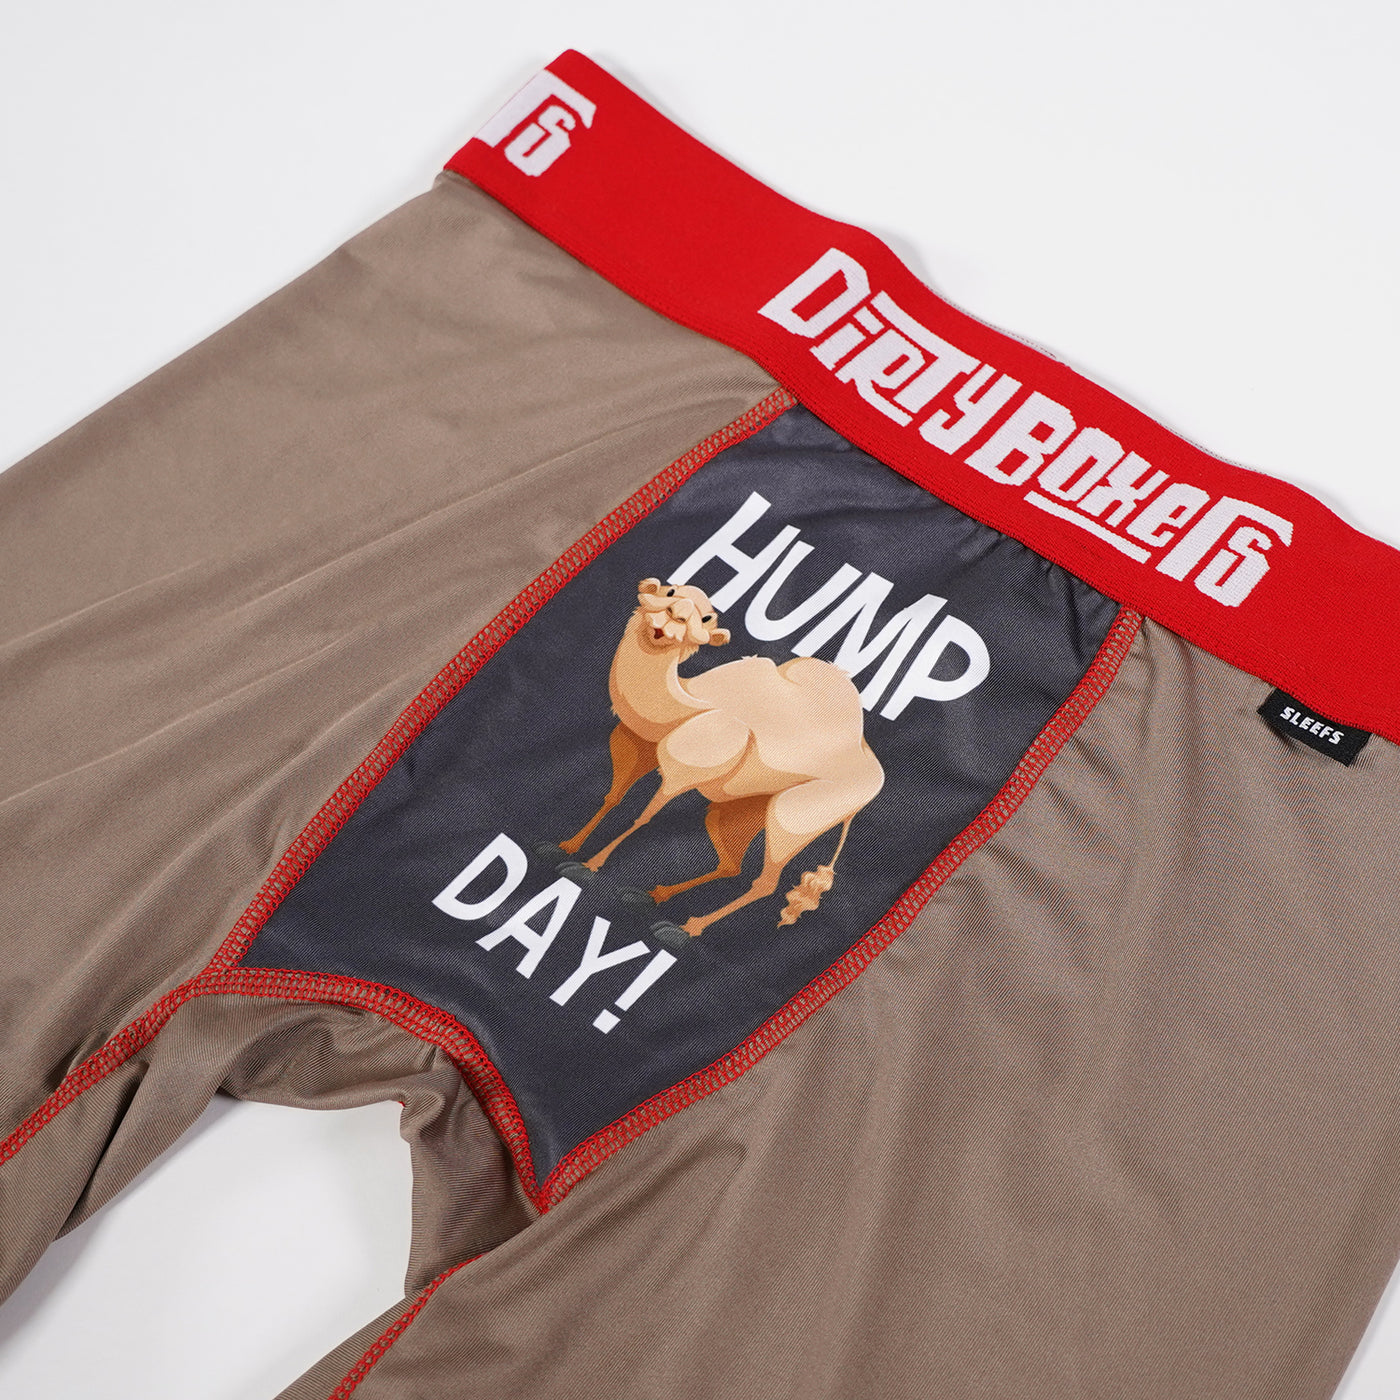 Hump Day Dirty Boxers Men's Underwear